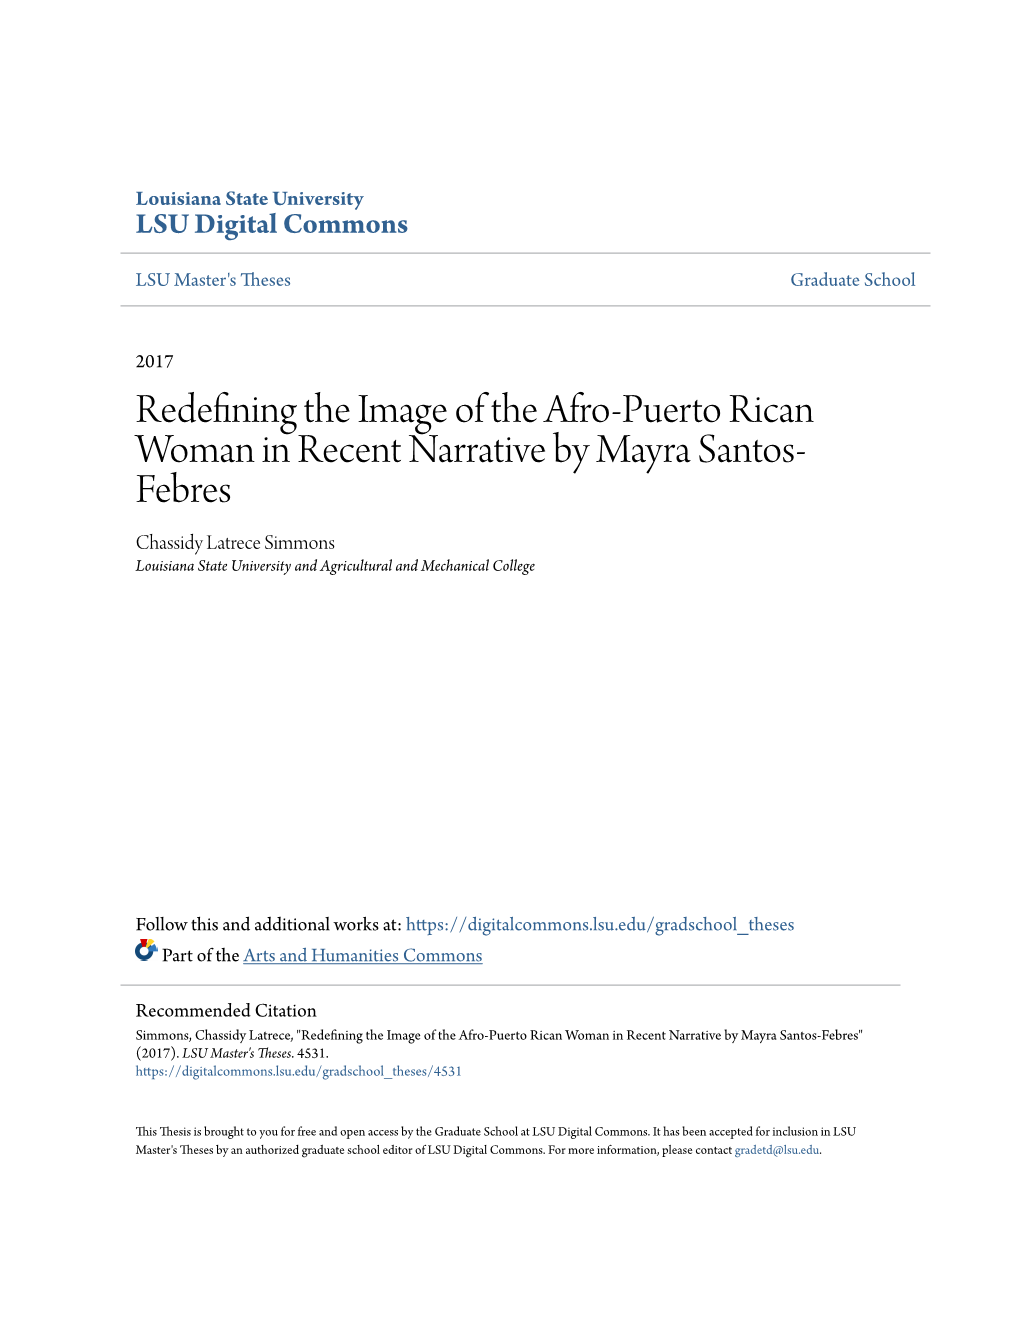 Redefining the Image of the Afro-Puerto Rican Woman in Recent Narrative by Mayra Santos-Febres" (2017)